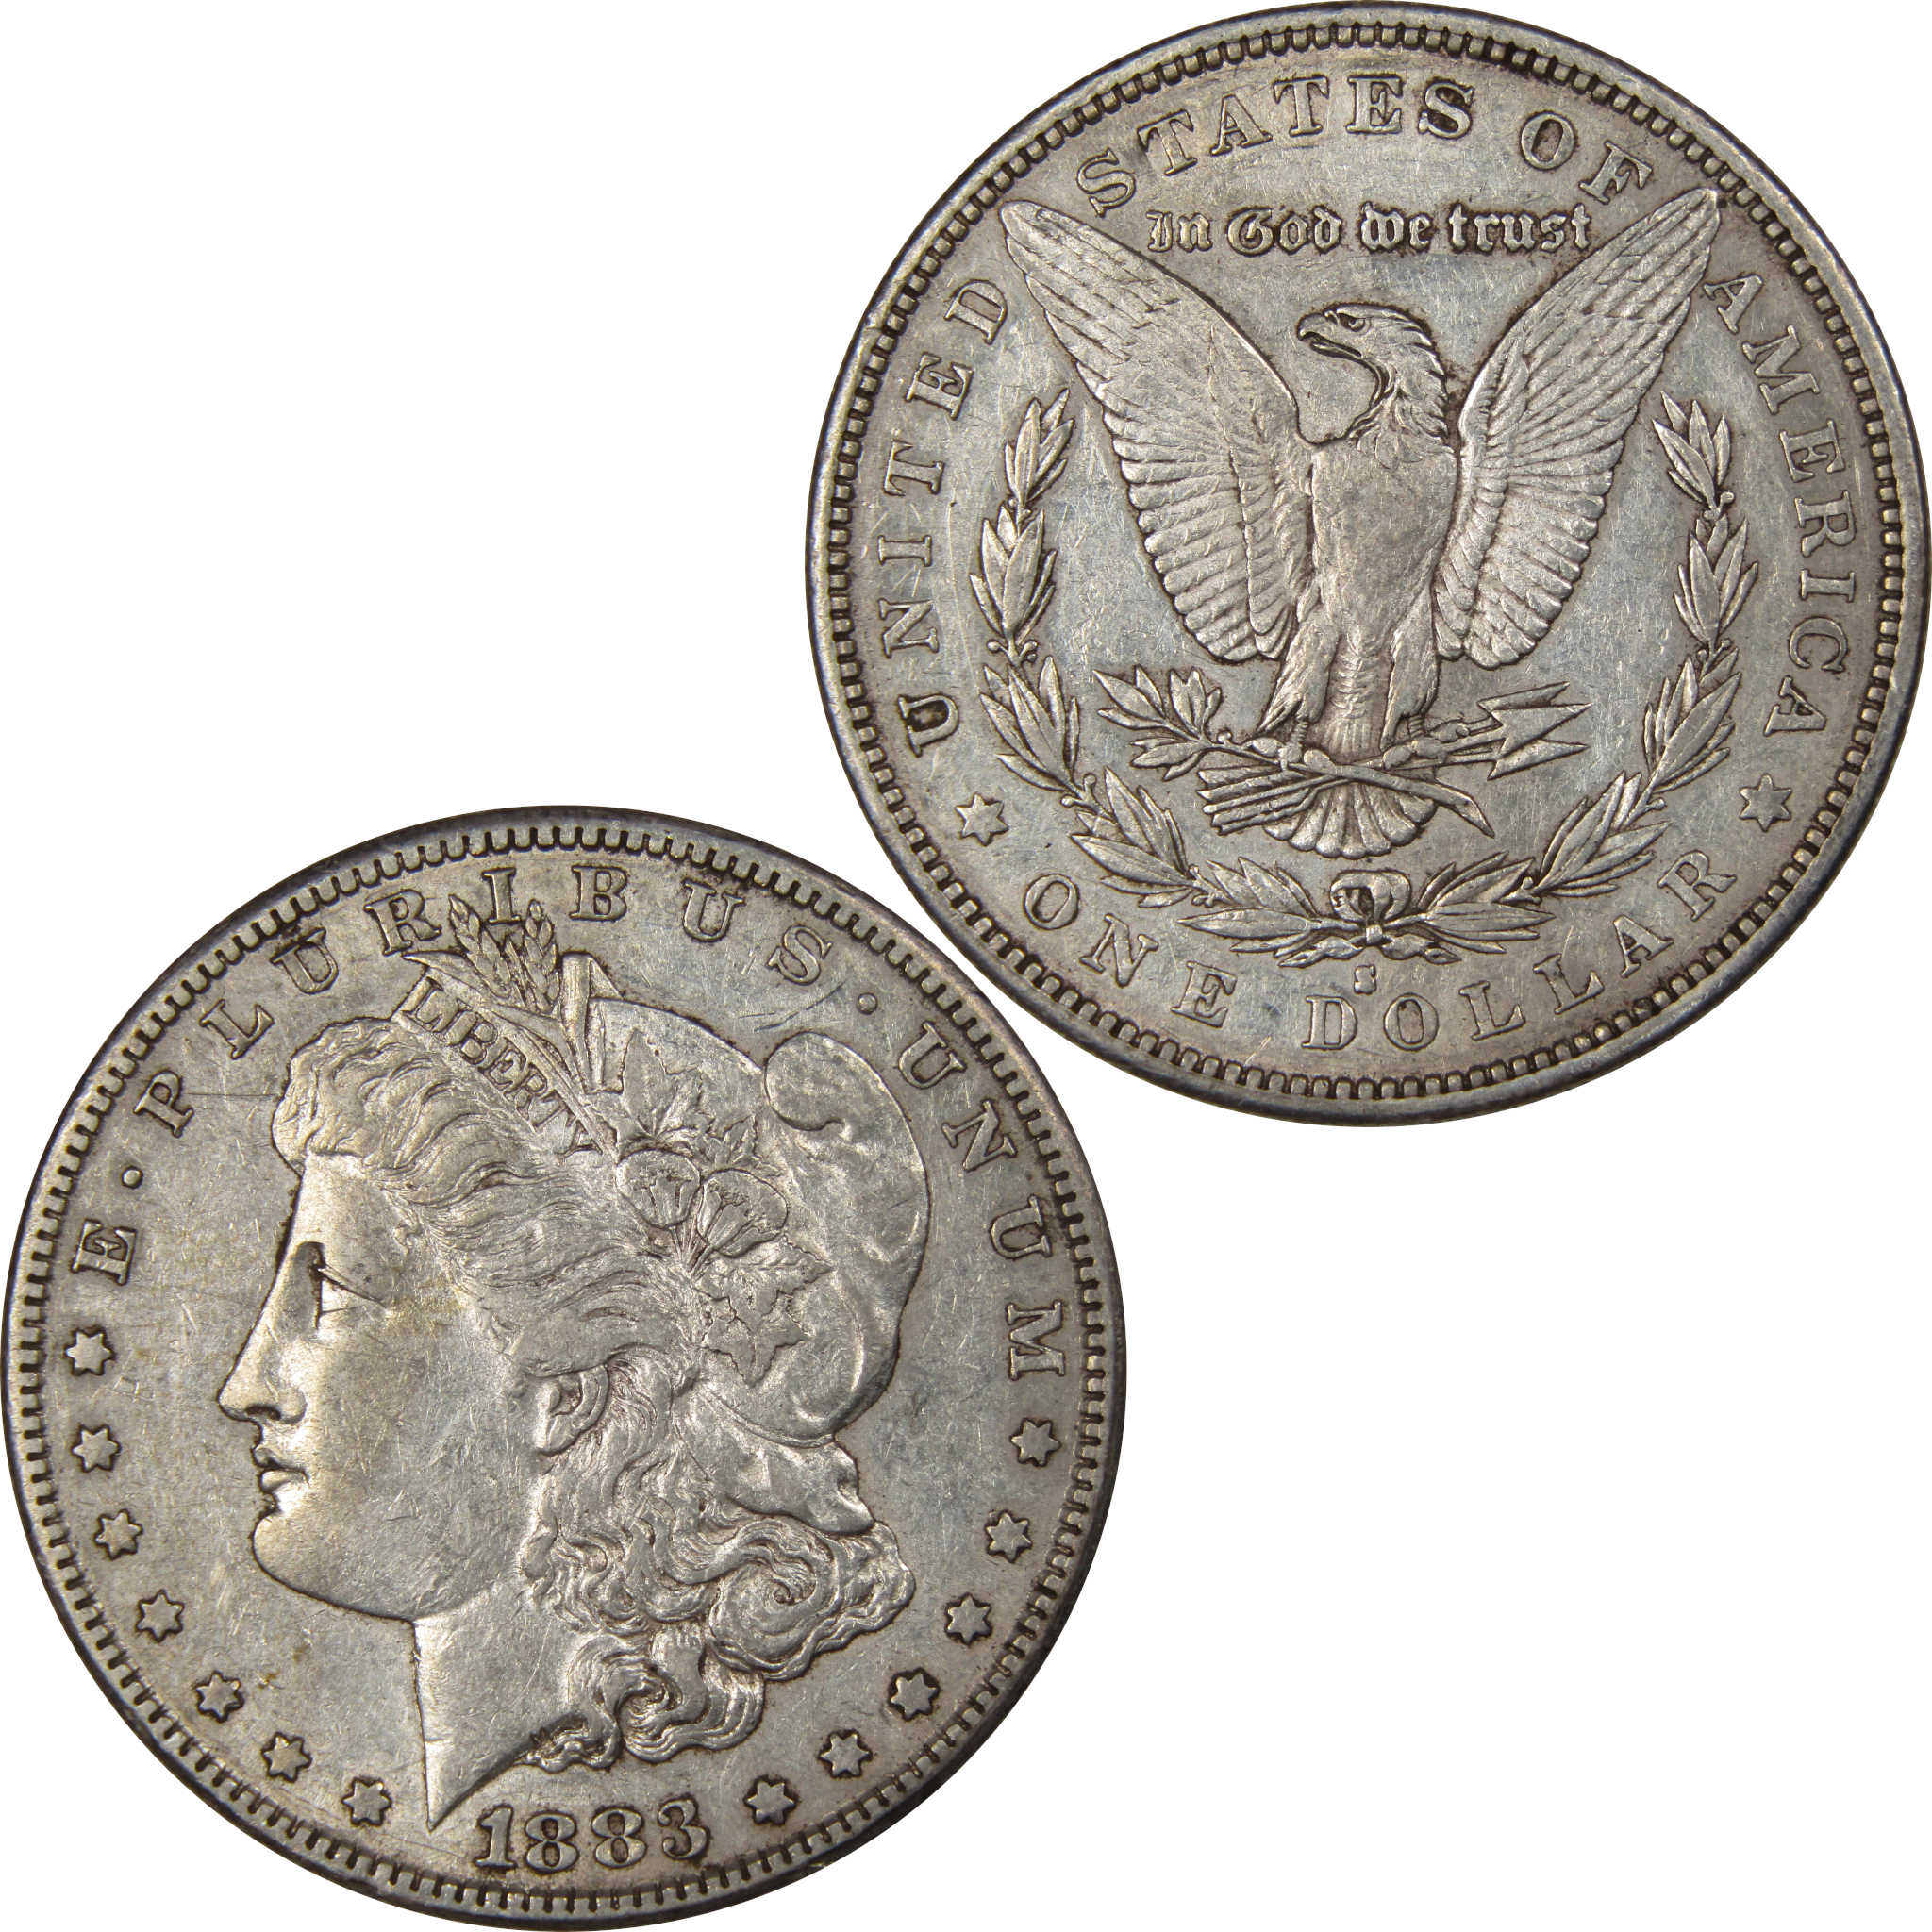 1883 S Morgan Dollar XF EF Extremely Fine 90% Silver Coin SKU:I1778 - Morgan coin - Morgan silver dollar - Morgan silver dollar for sale - Profile Coins &amp; Collectibles